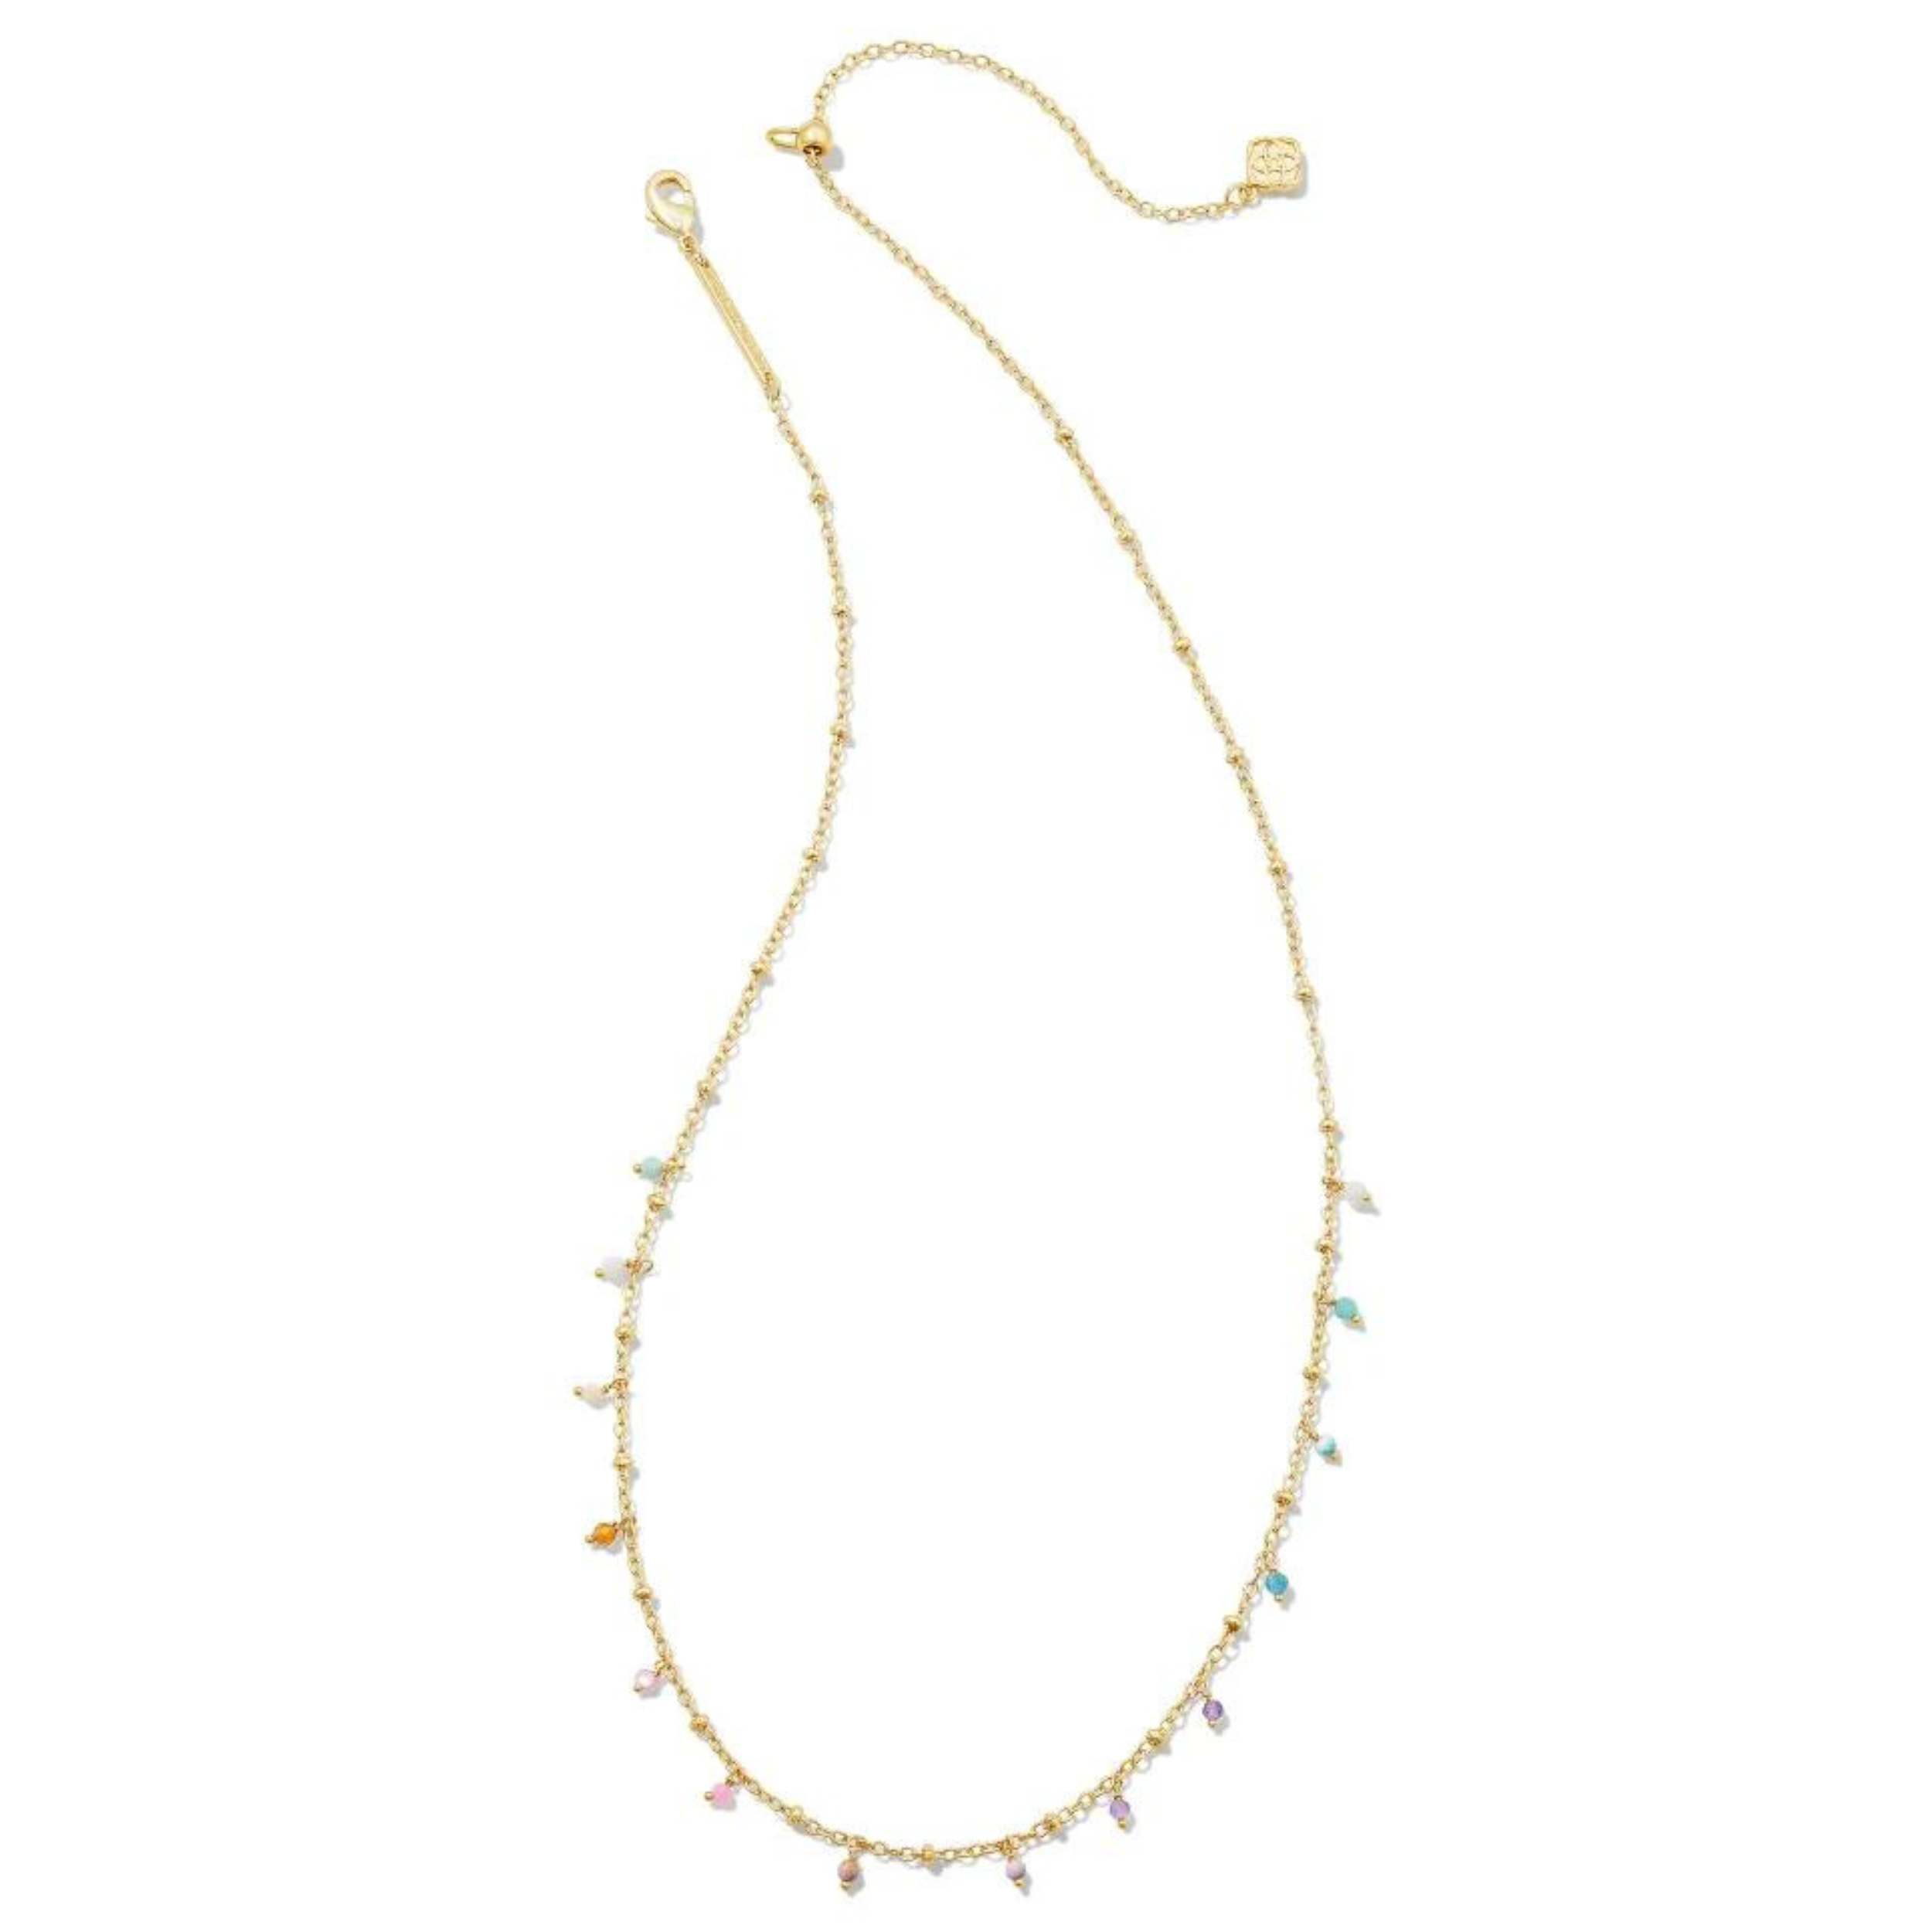 Gold strand with pastel mix beads, pictured on a white background.